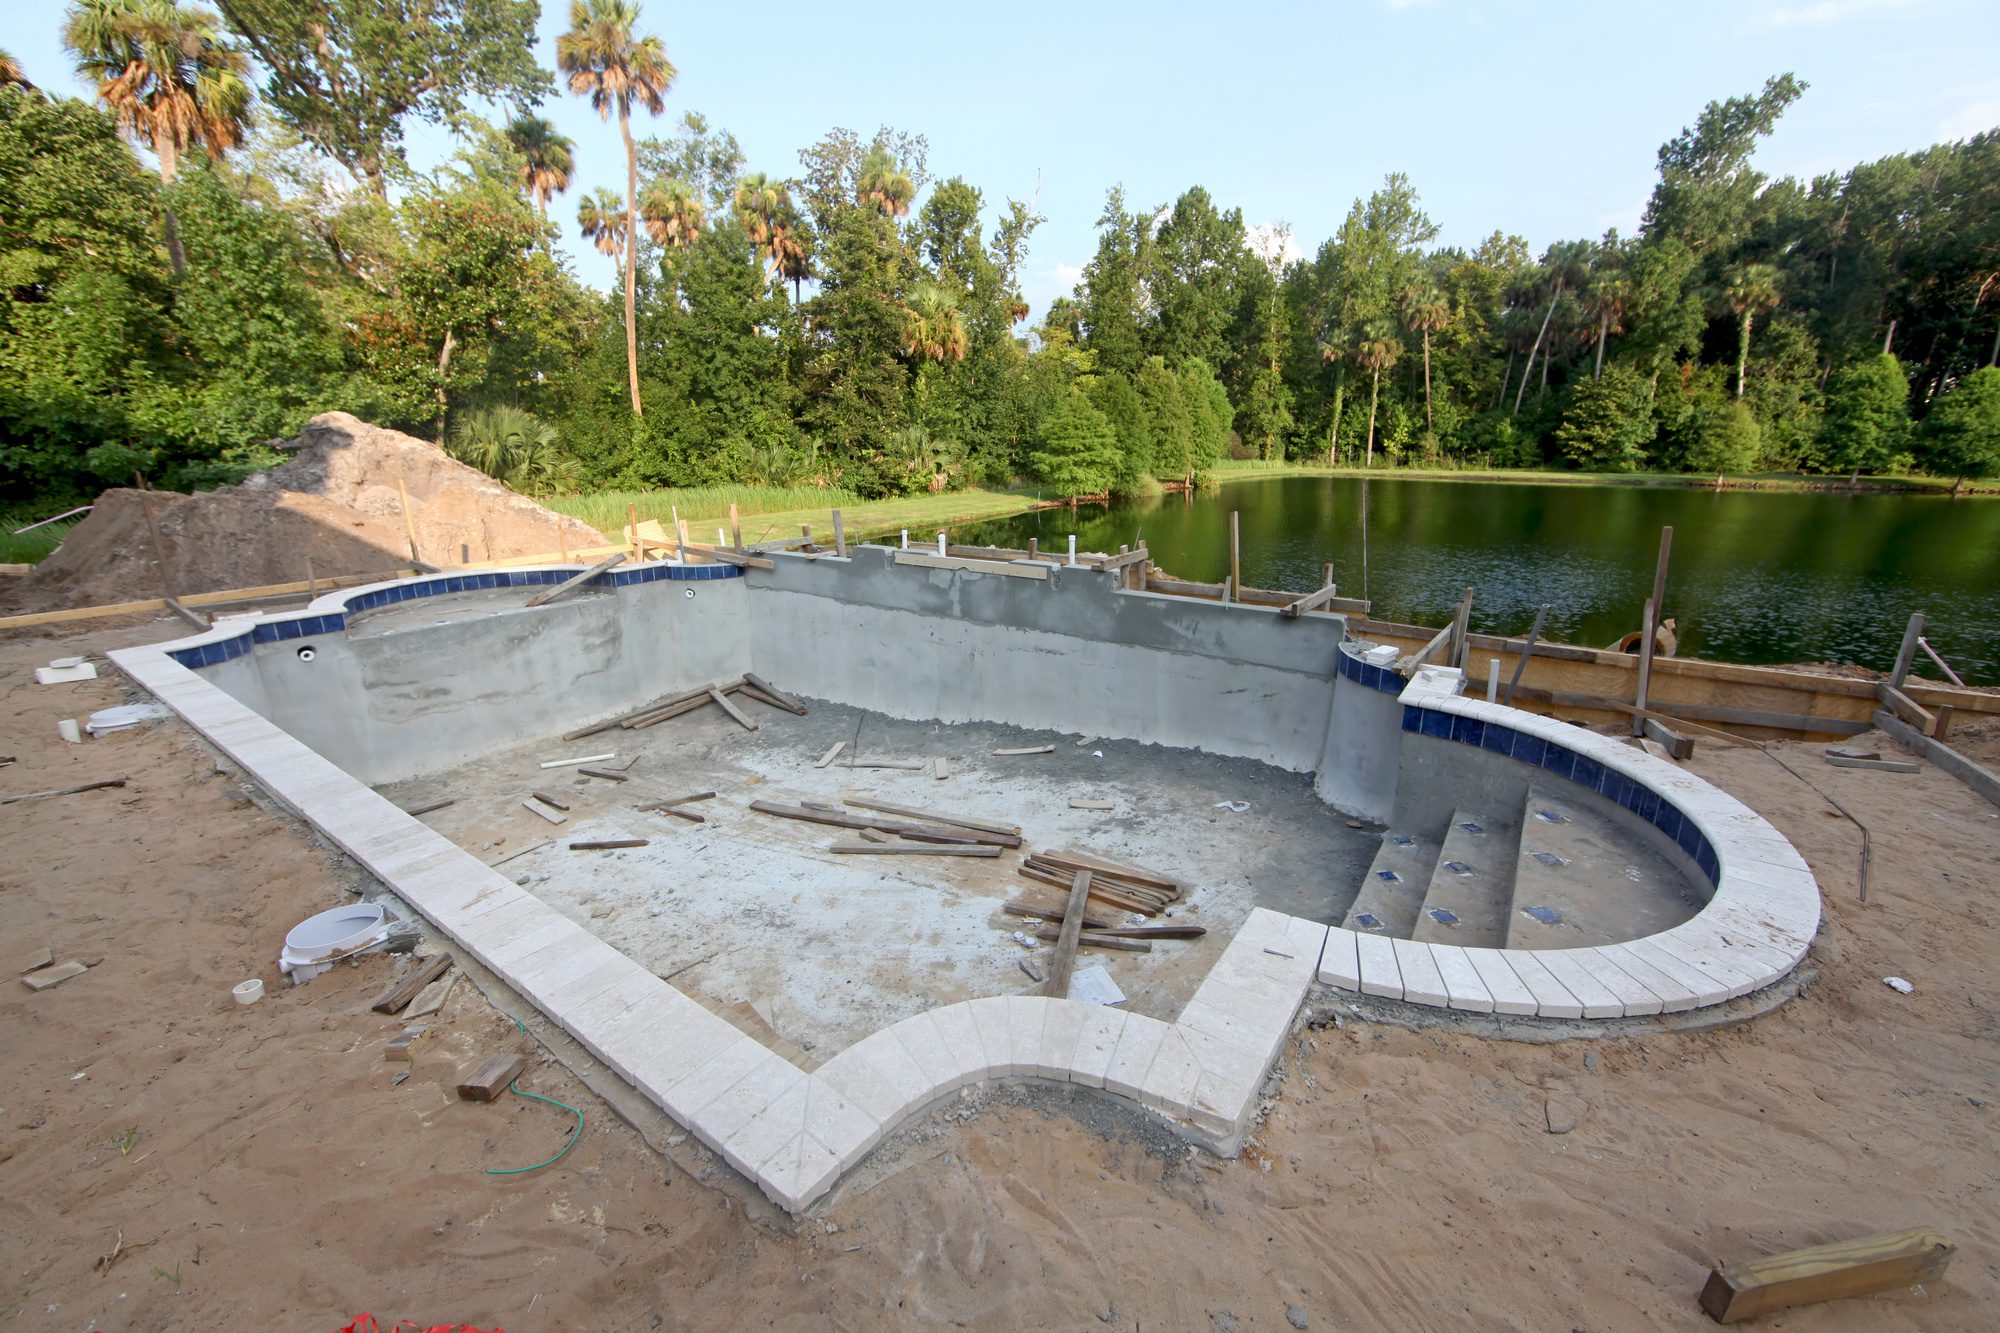 Are You Embarrassed By Your Hayward Sand Pool Filter Skills? Here's What To Do